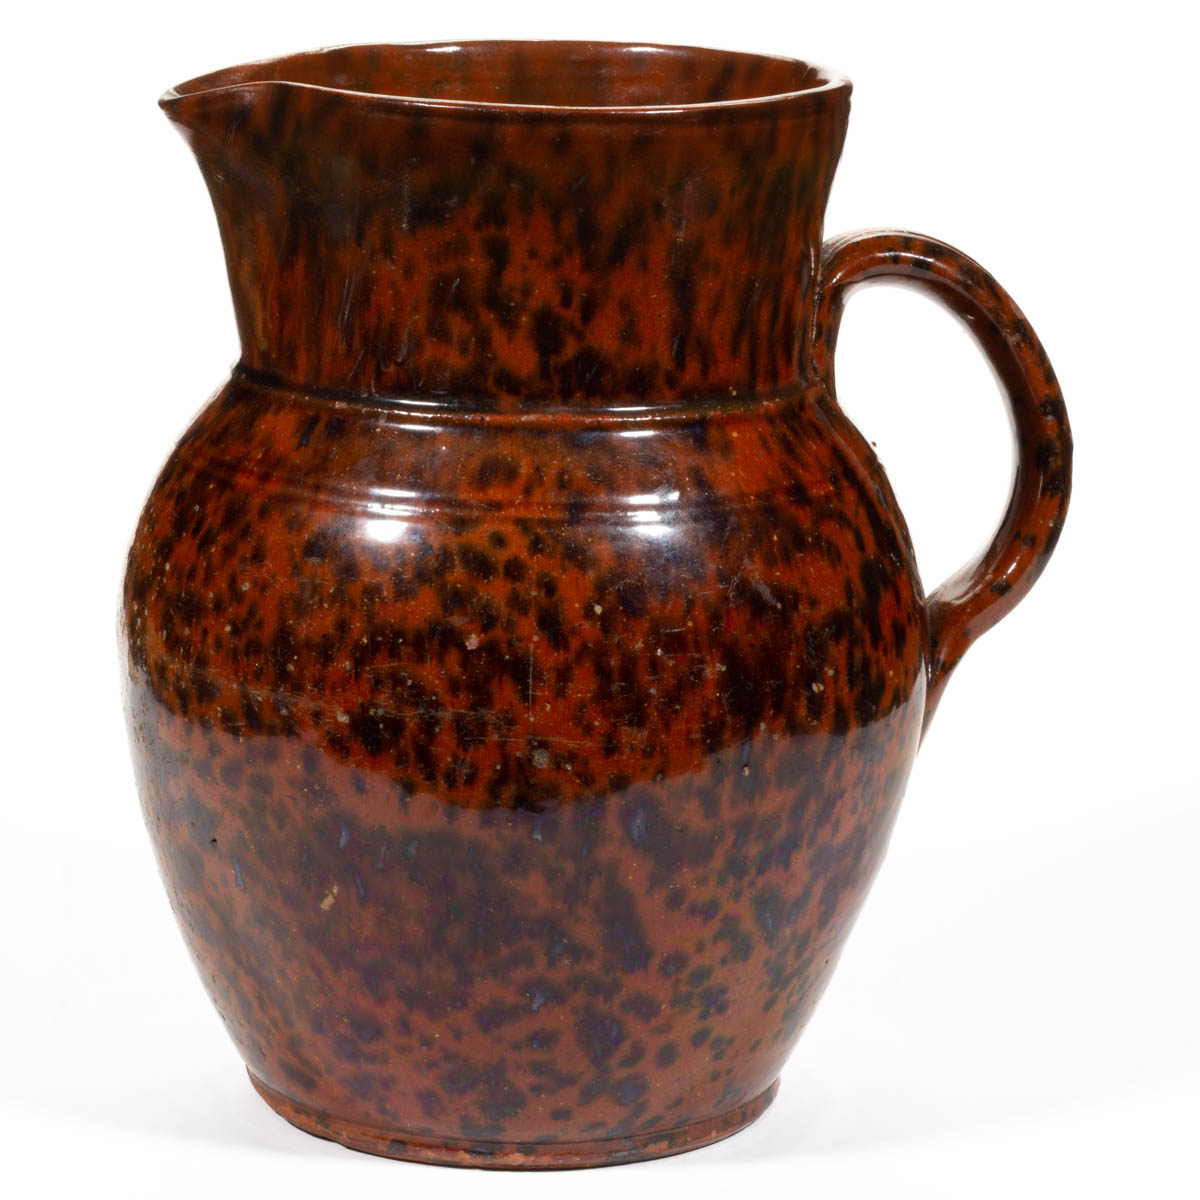 AMERICAN DECORATED EARTHENWARE / REDWARE PITCHER